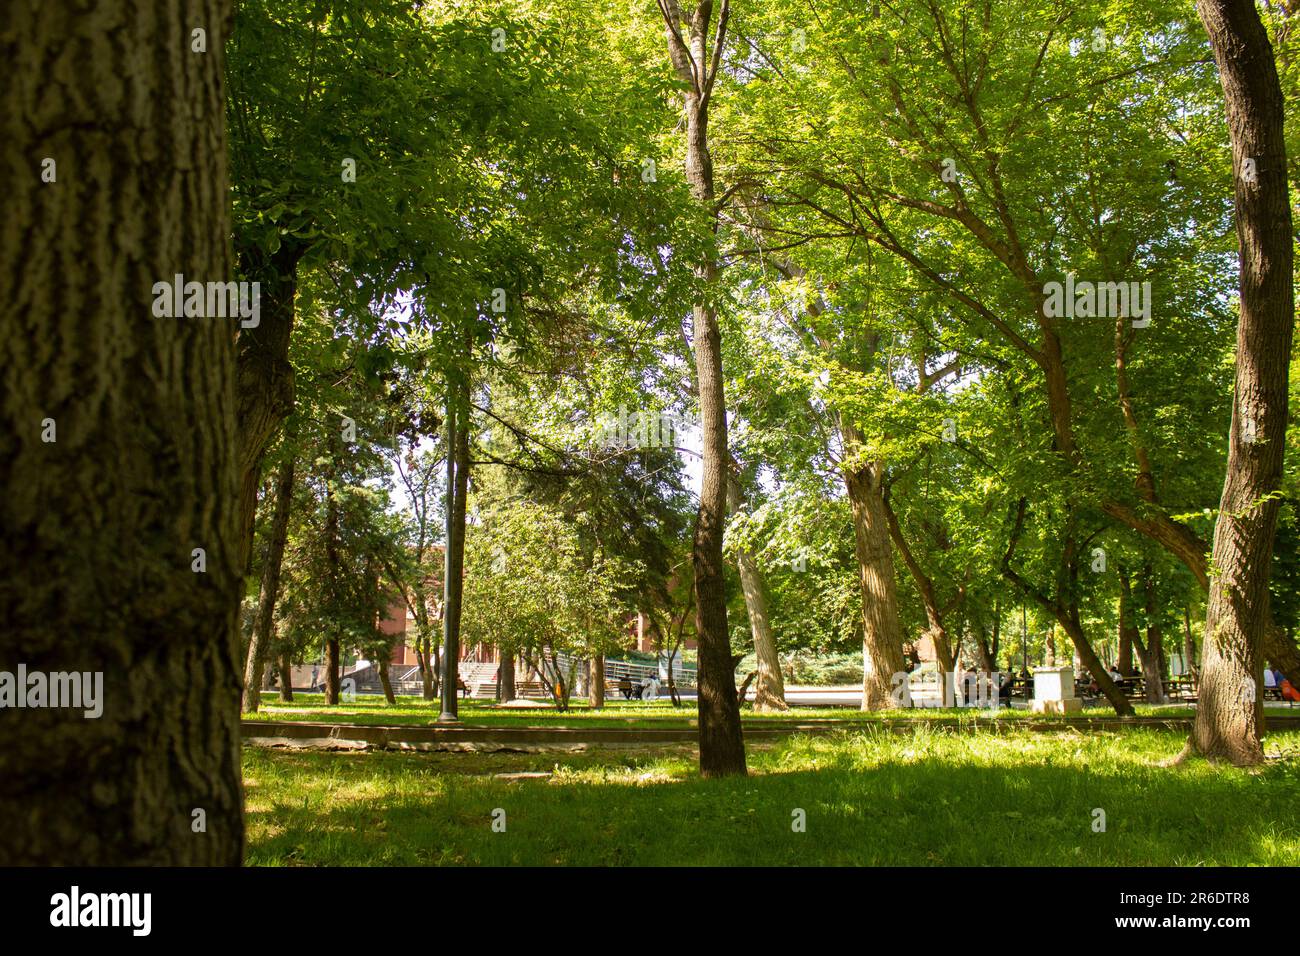 Green lawns and beautiful trees in the park. People are relaxing. Freshness, summer, sunshine and sky. Stock Photo